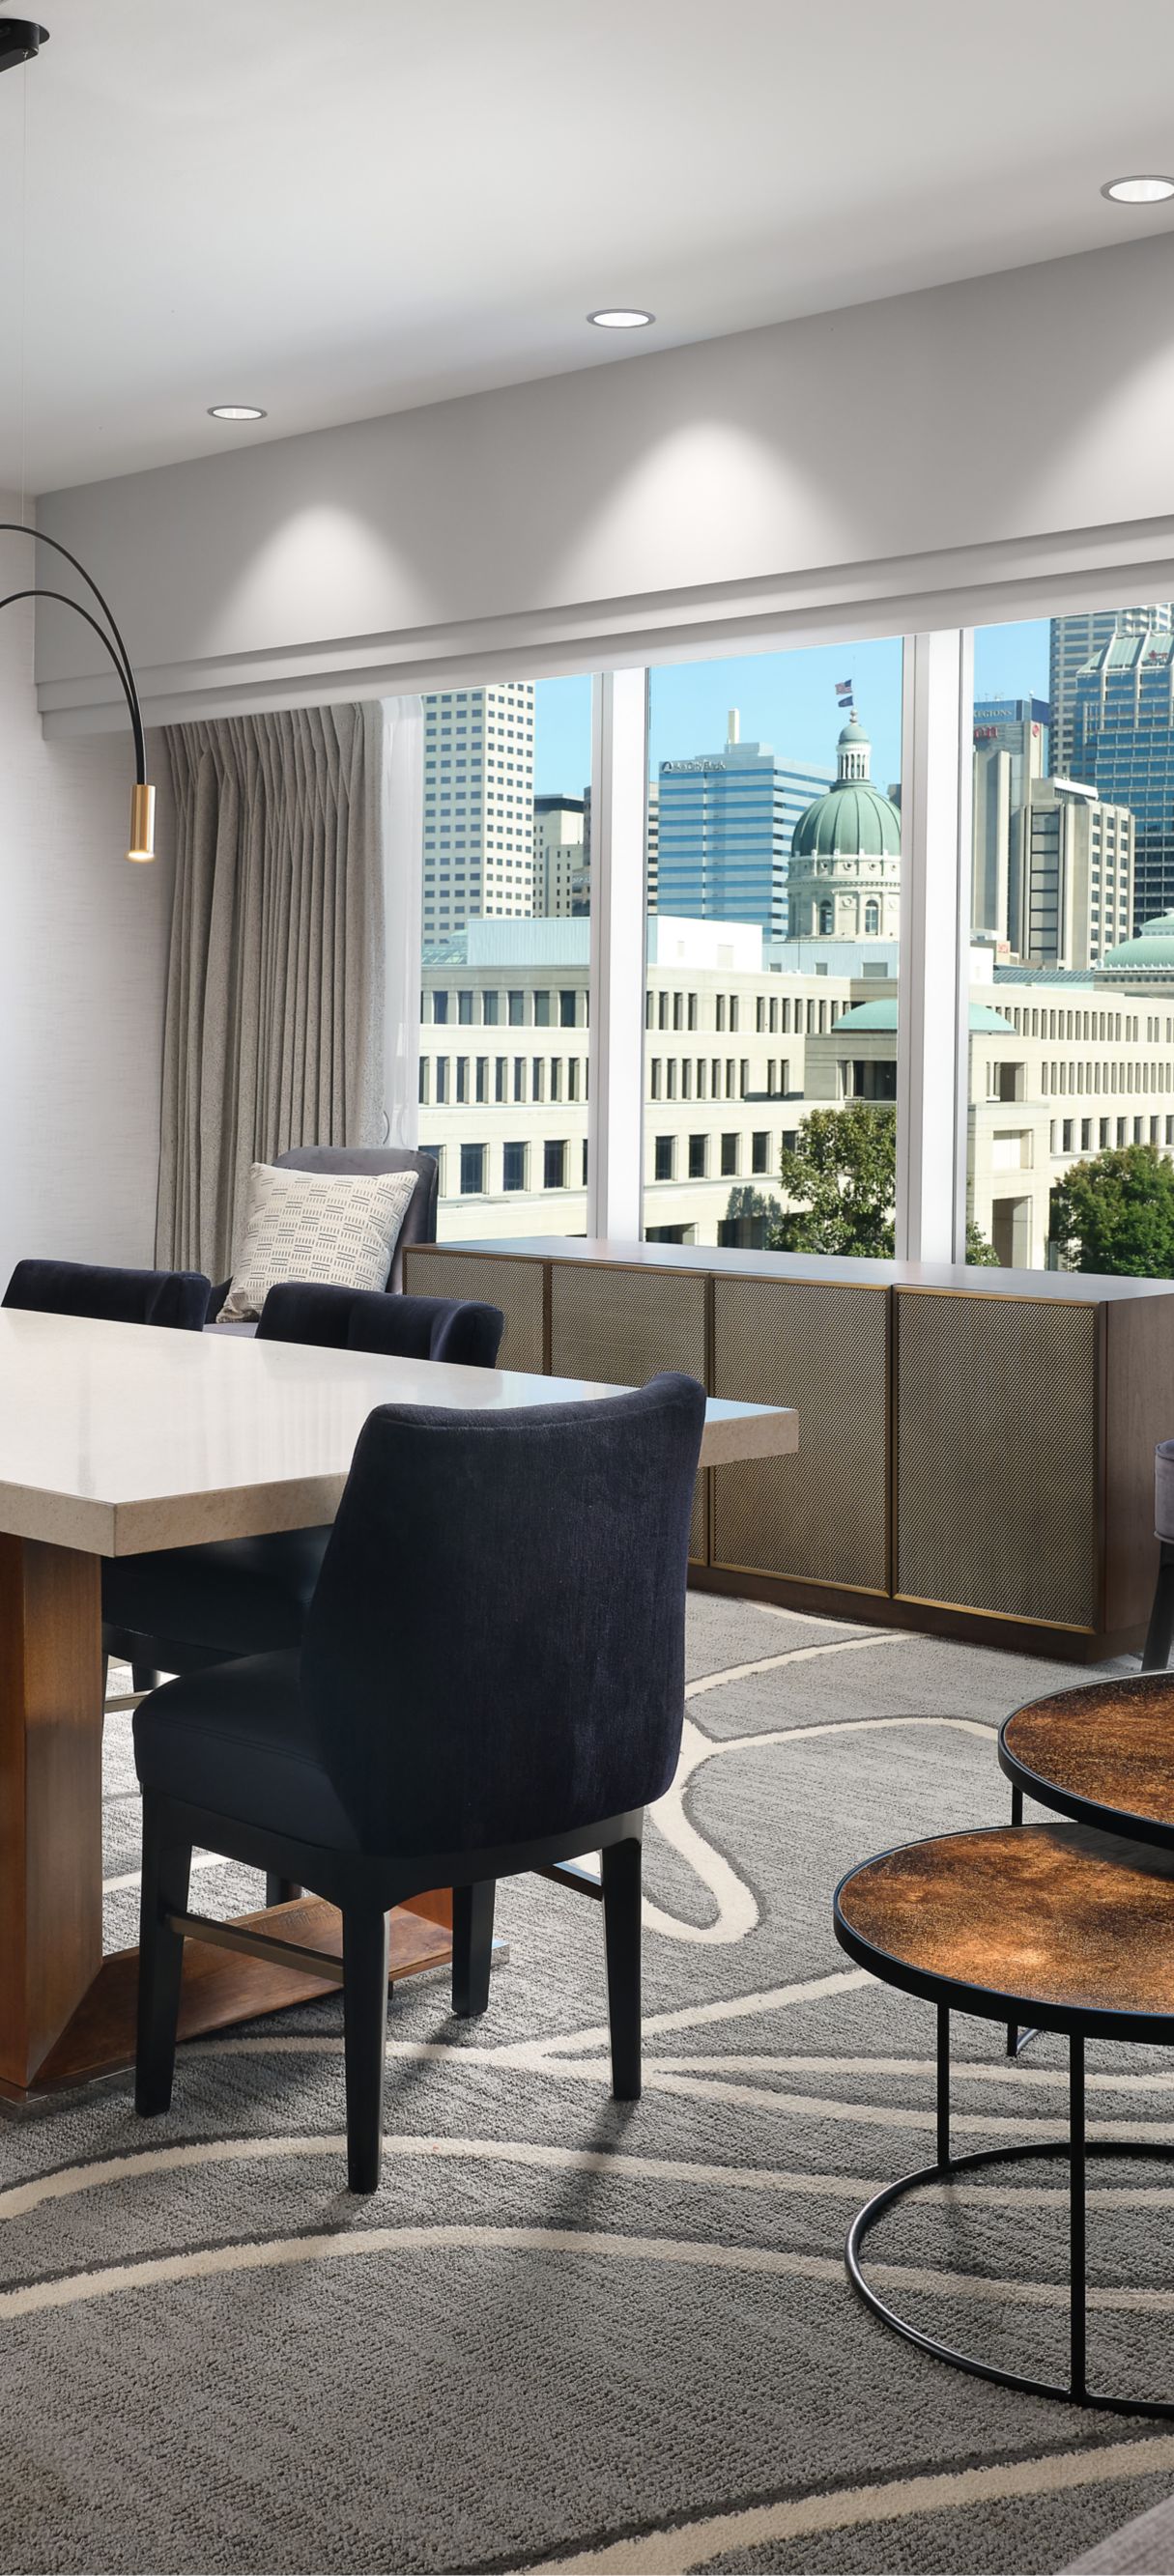 JW Marriott Indianapolis in Indianapolis, the United States from $151:  Deals, Reviews, Photos